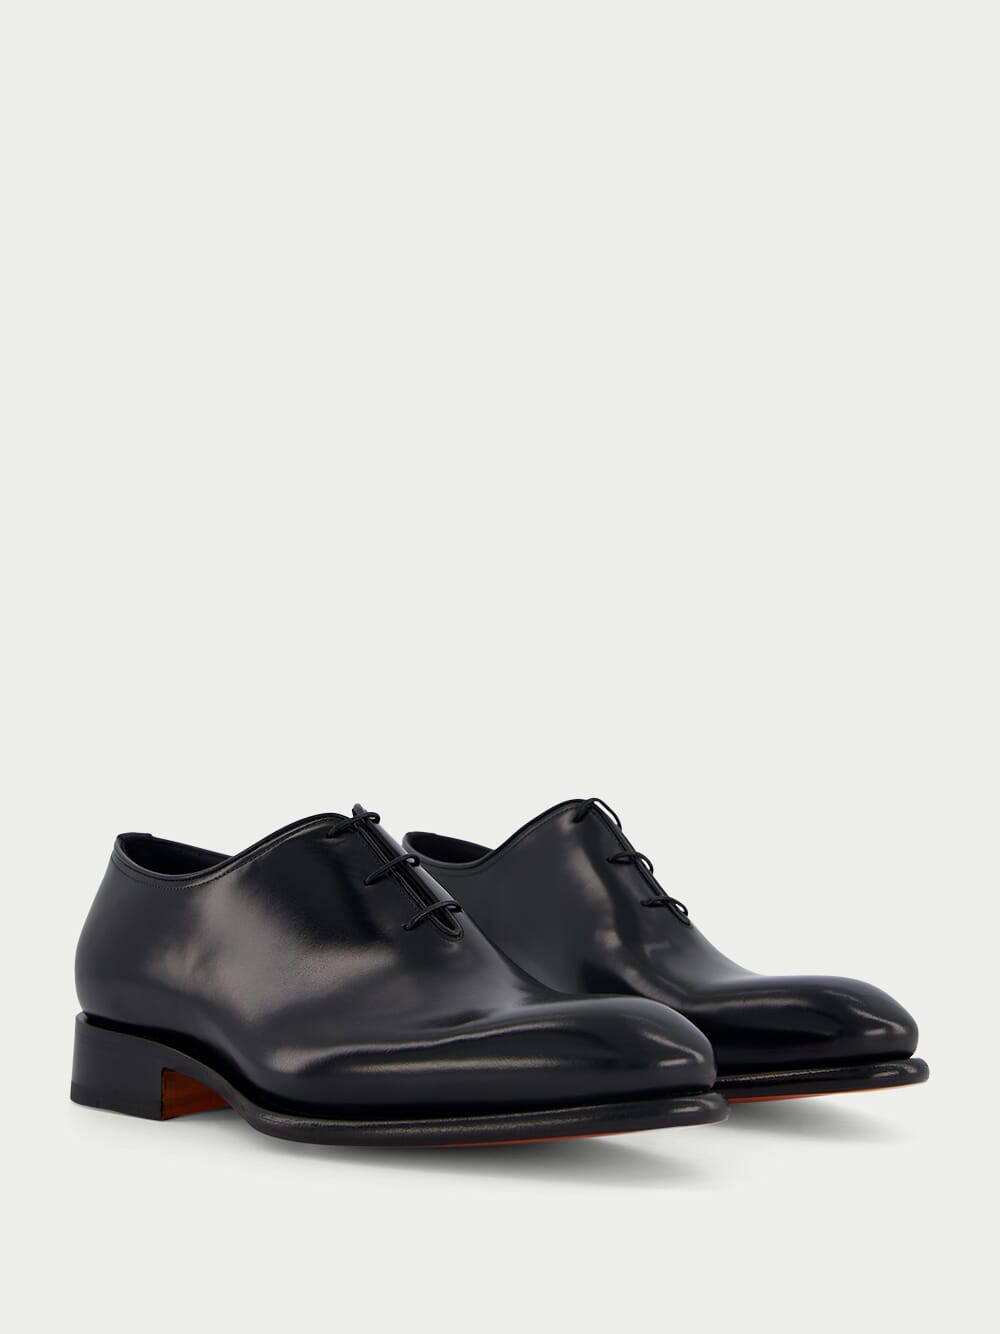 SantoniLeather Oxford Shoes at Fashion Clinic